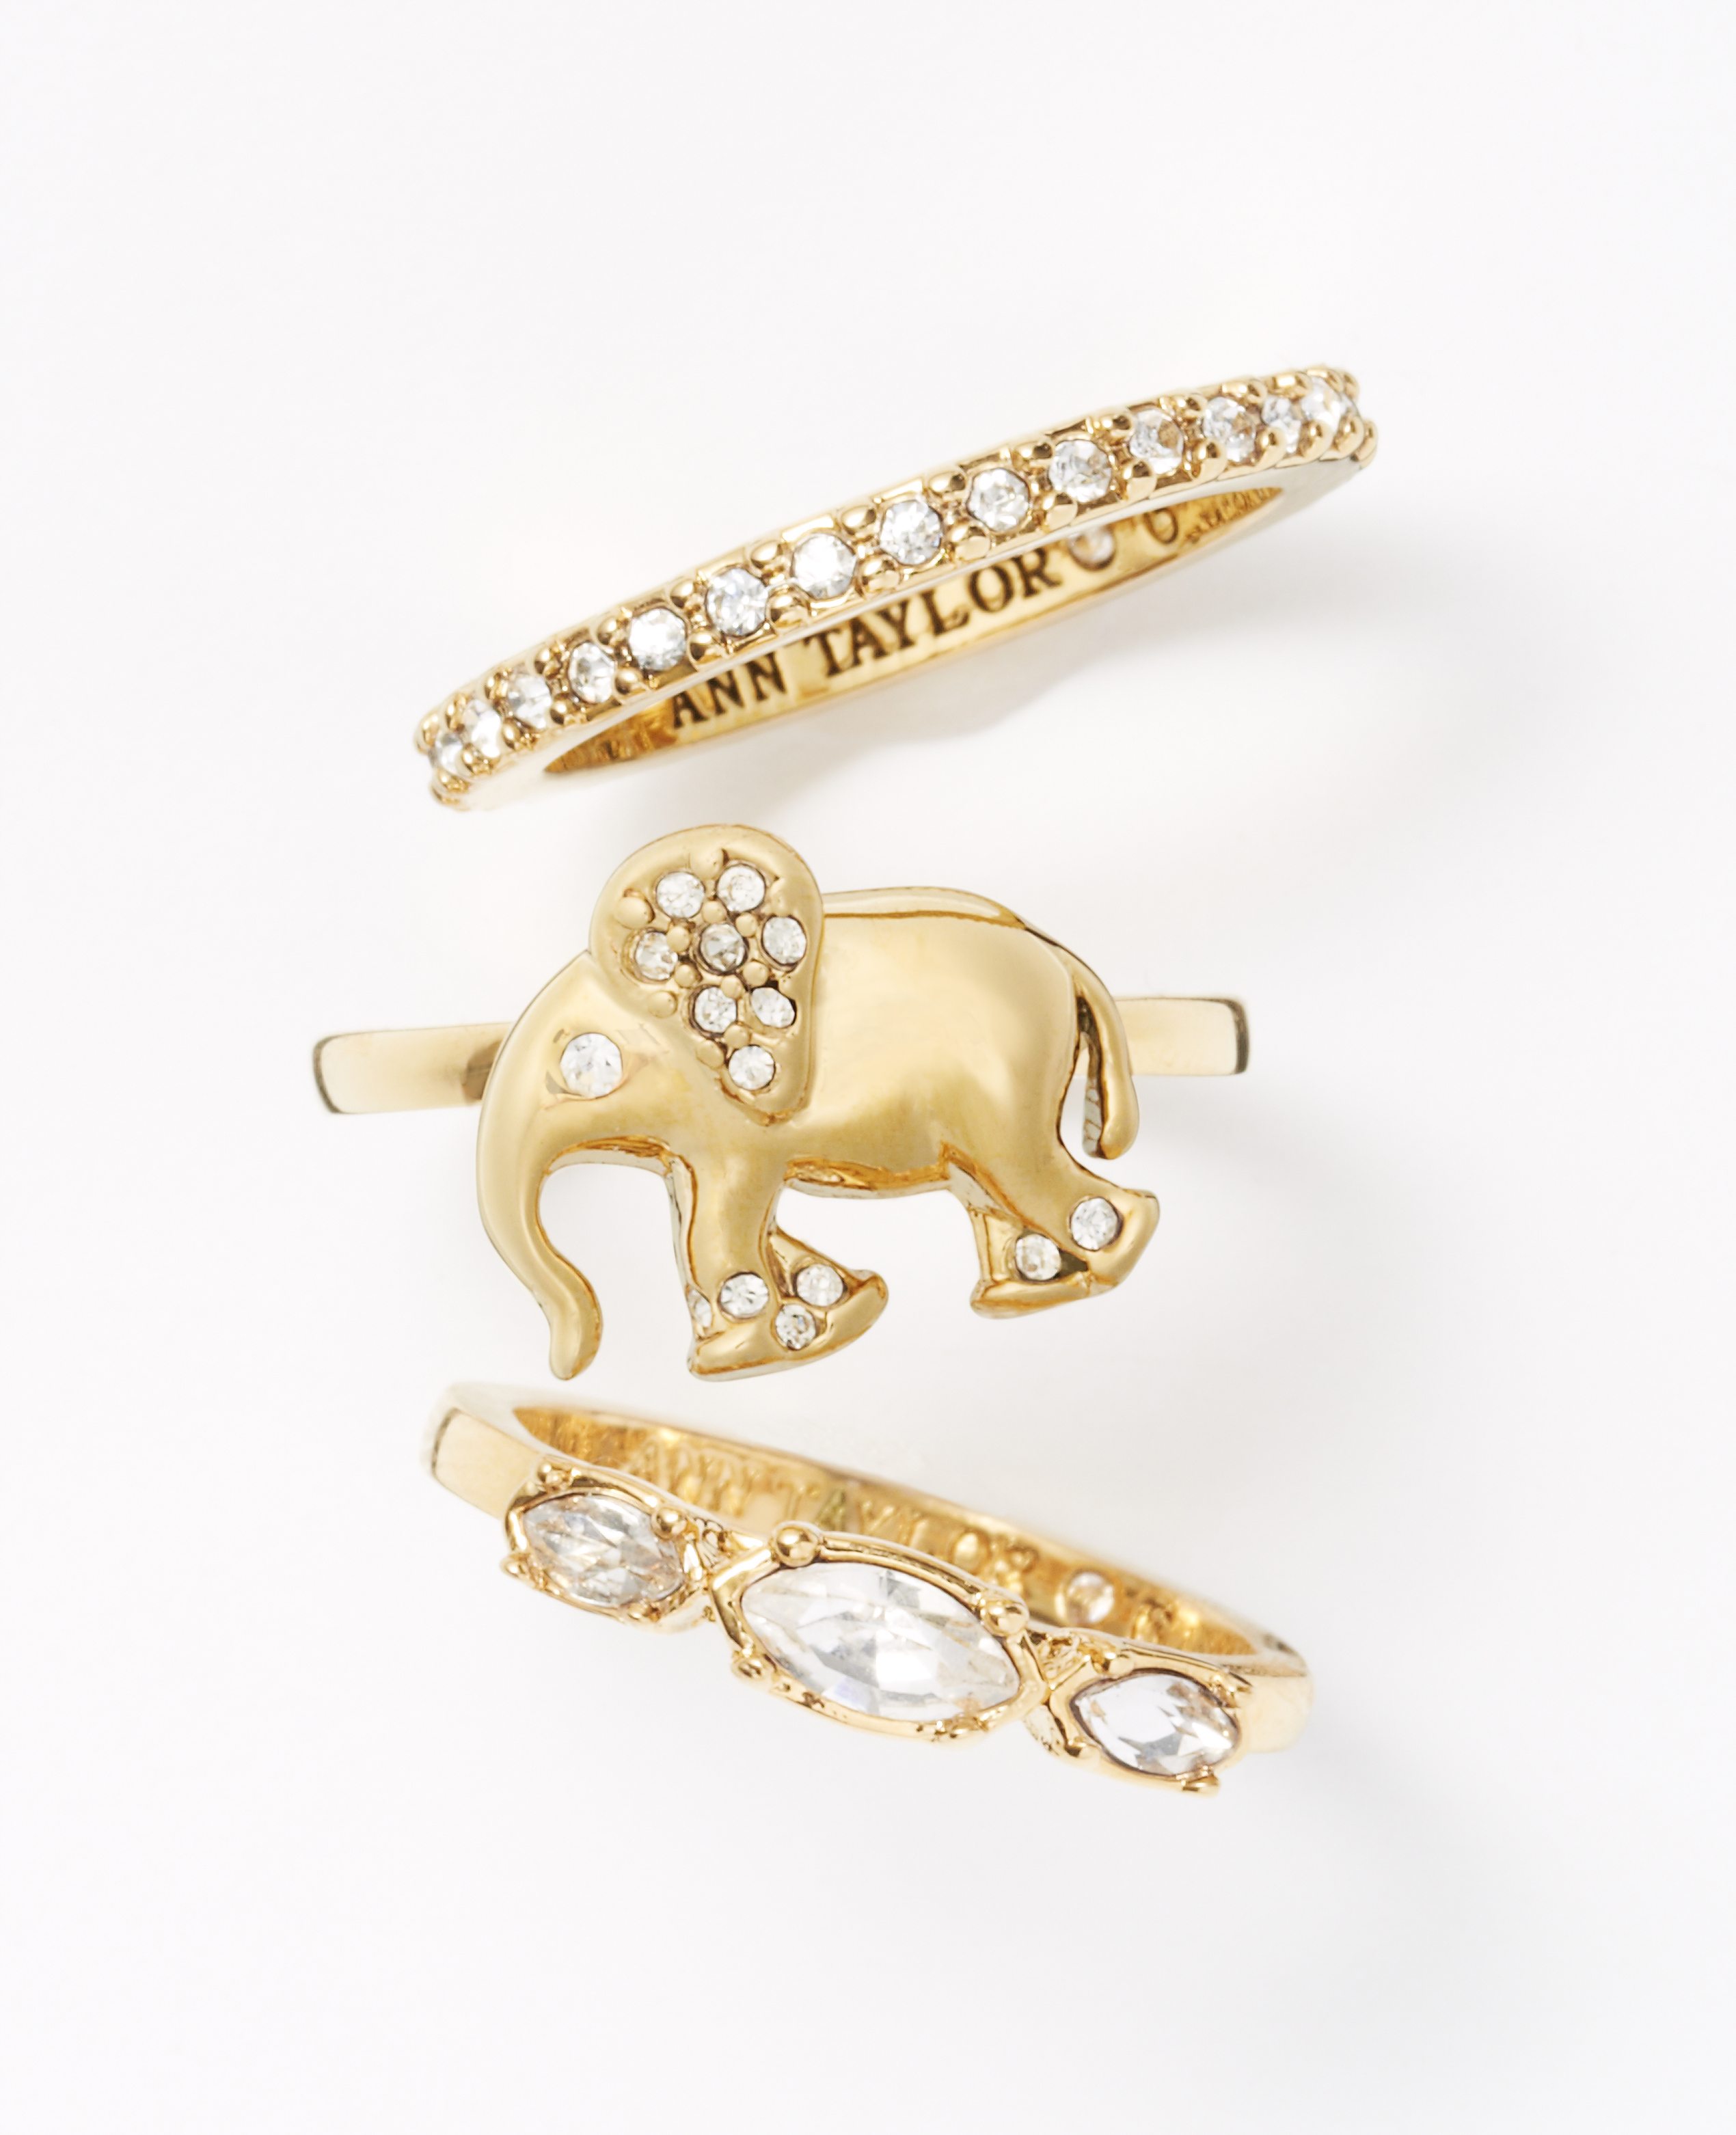 Ann Taylor Limited Edition Elephant Charm Jewelry Collection